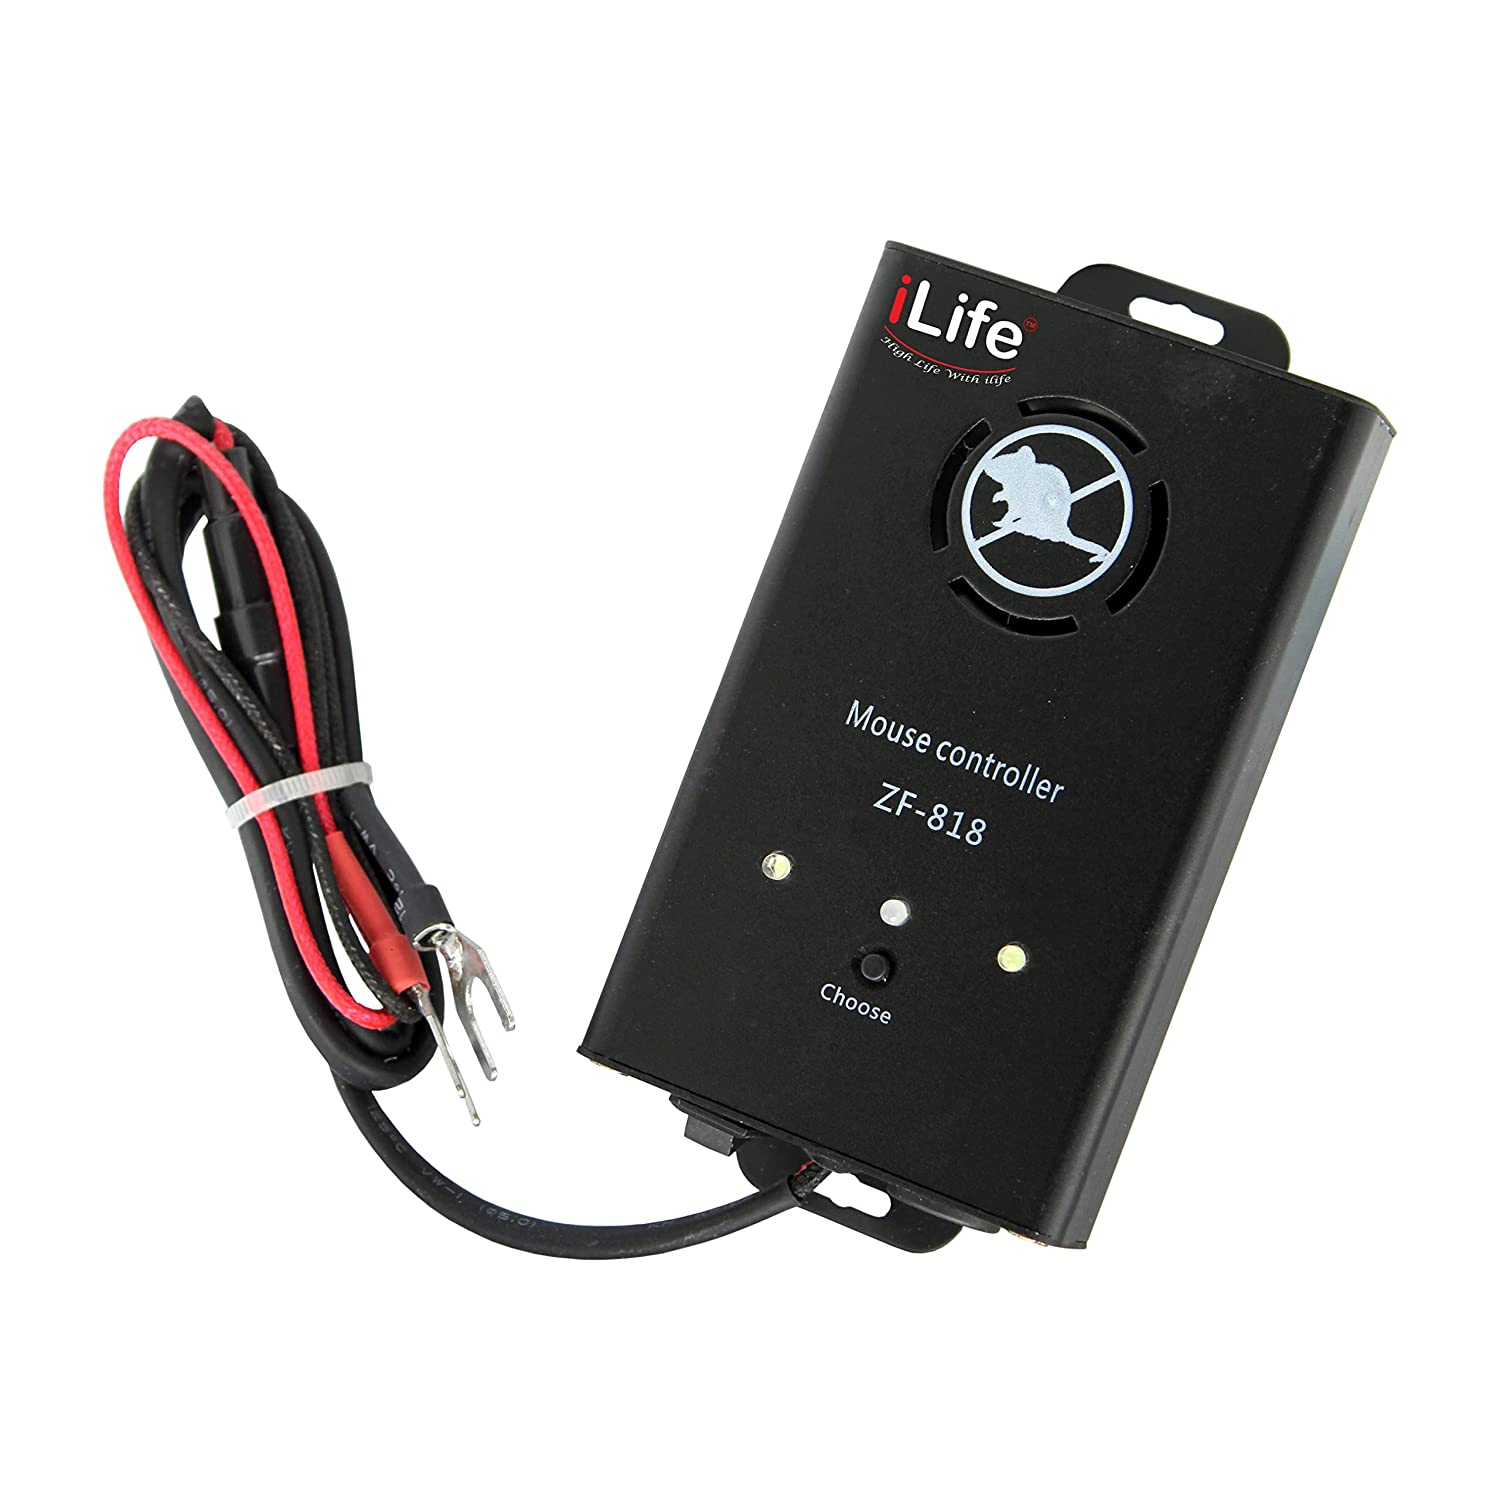 iLife Metal Black Body Car and Home Rat Rodent Ultrasonic Electronic Vehicle Chases Rat Rodent Mice Mouse Repellent (12V)